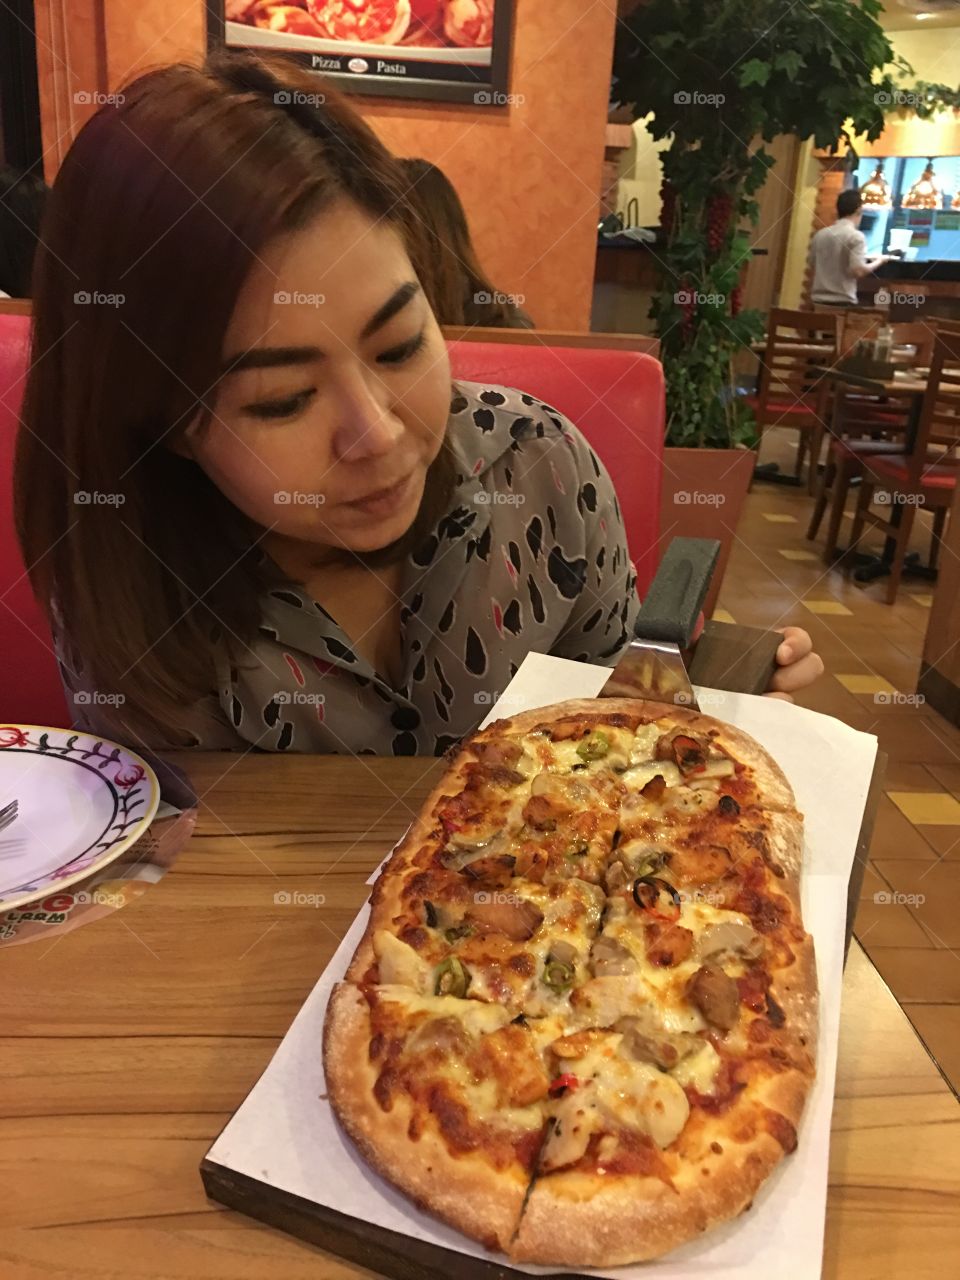 Pizza and the girl